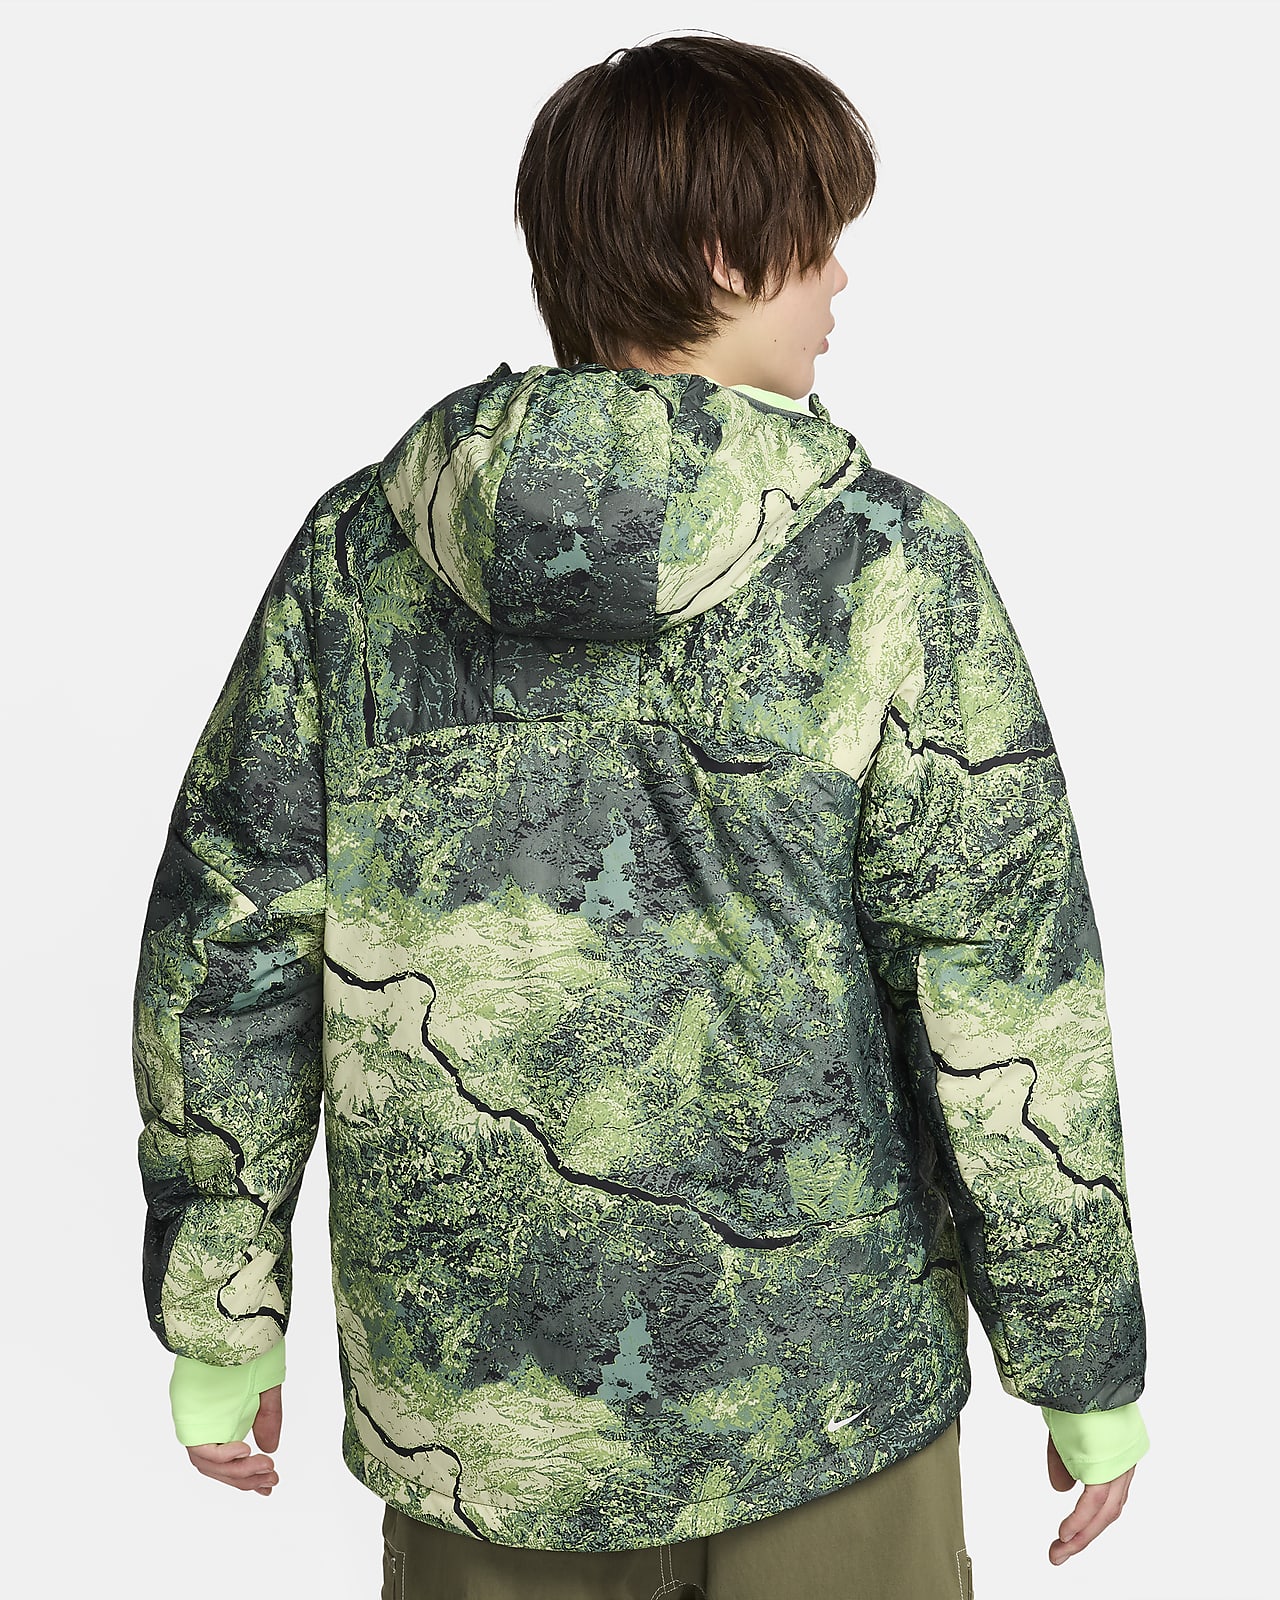 Nike ACG 'Rope de Dope' Men's Therma-FIT ADV All-Over Print Jacket